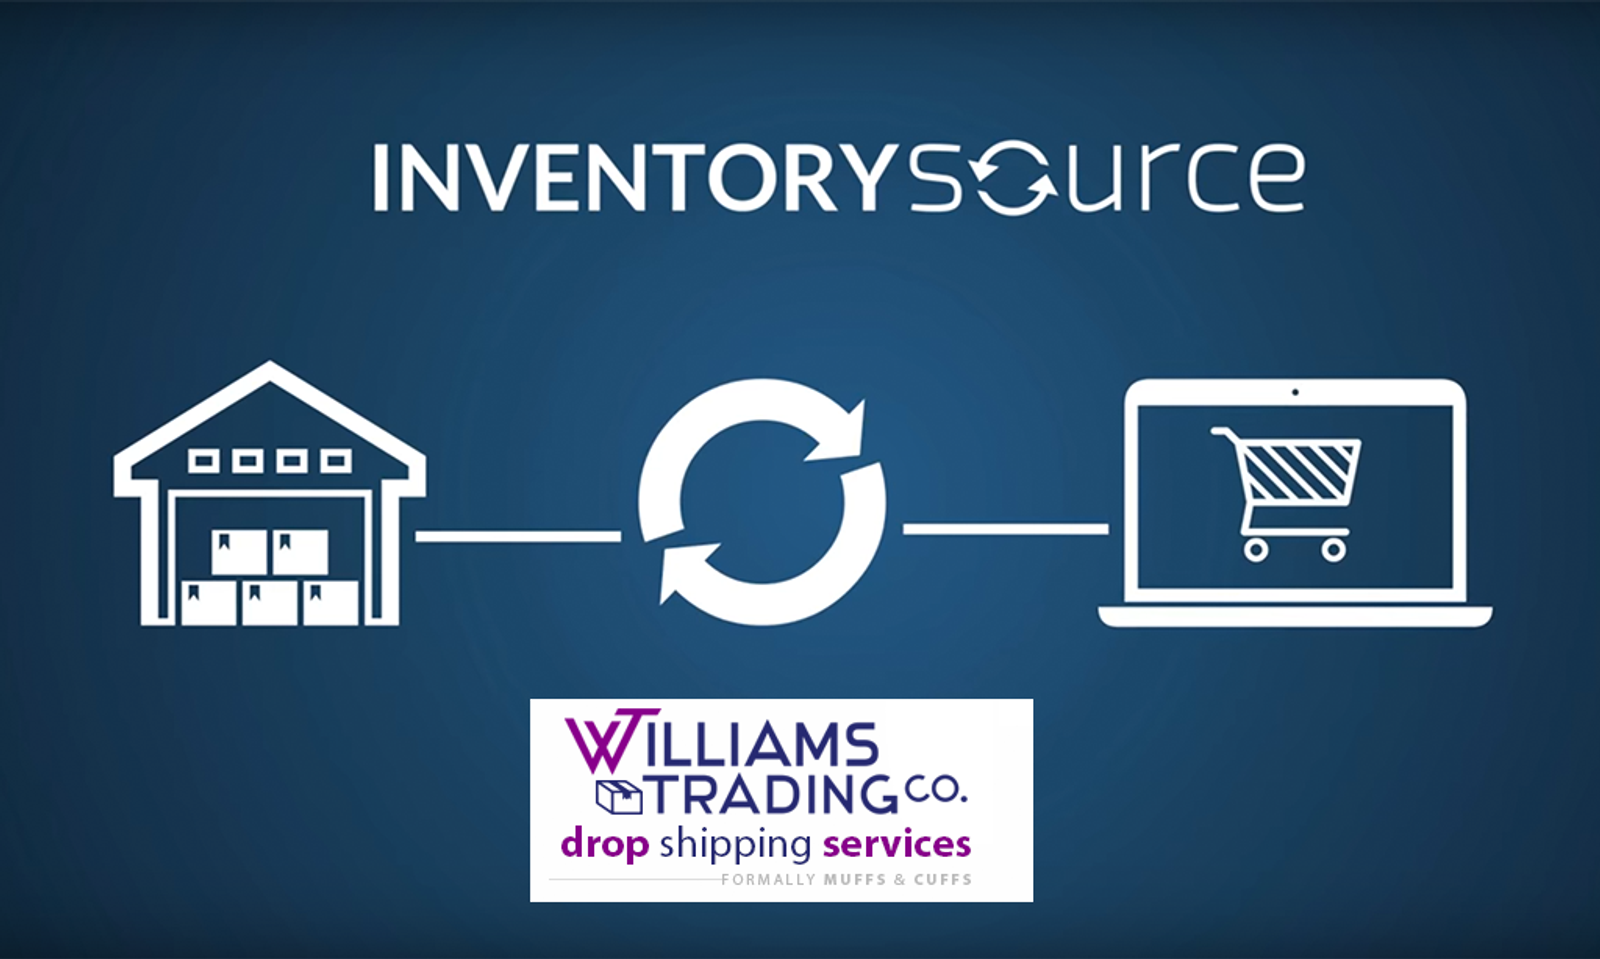 Williams Trading Co. Automates Its Drop Shipment Services